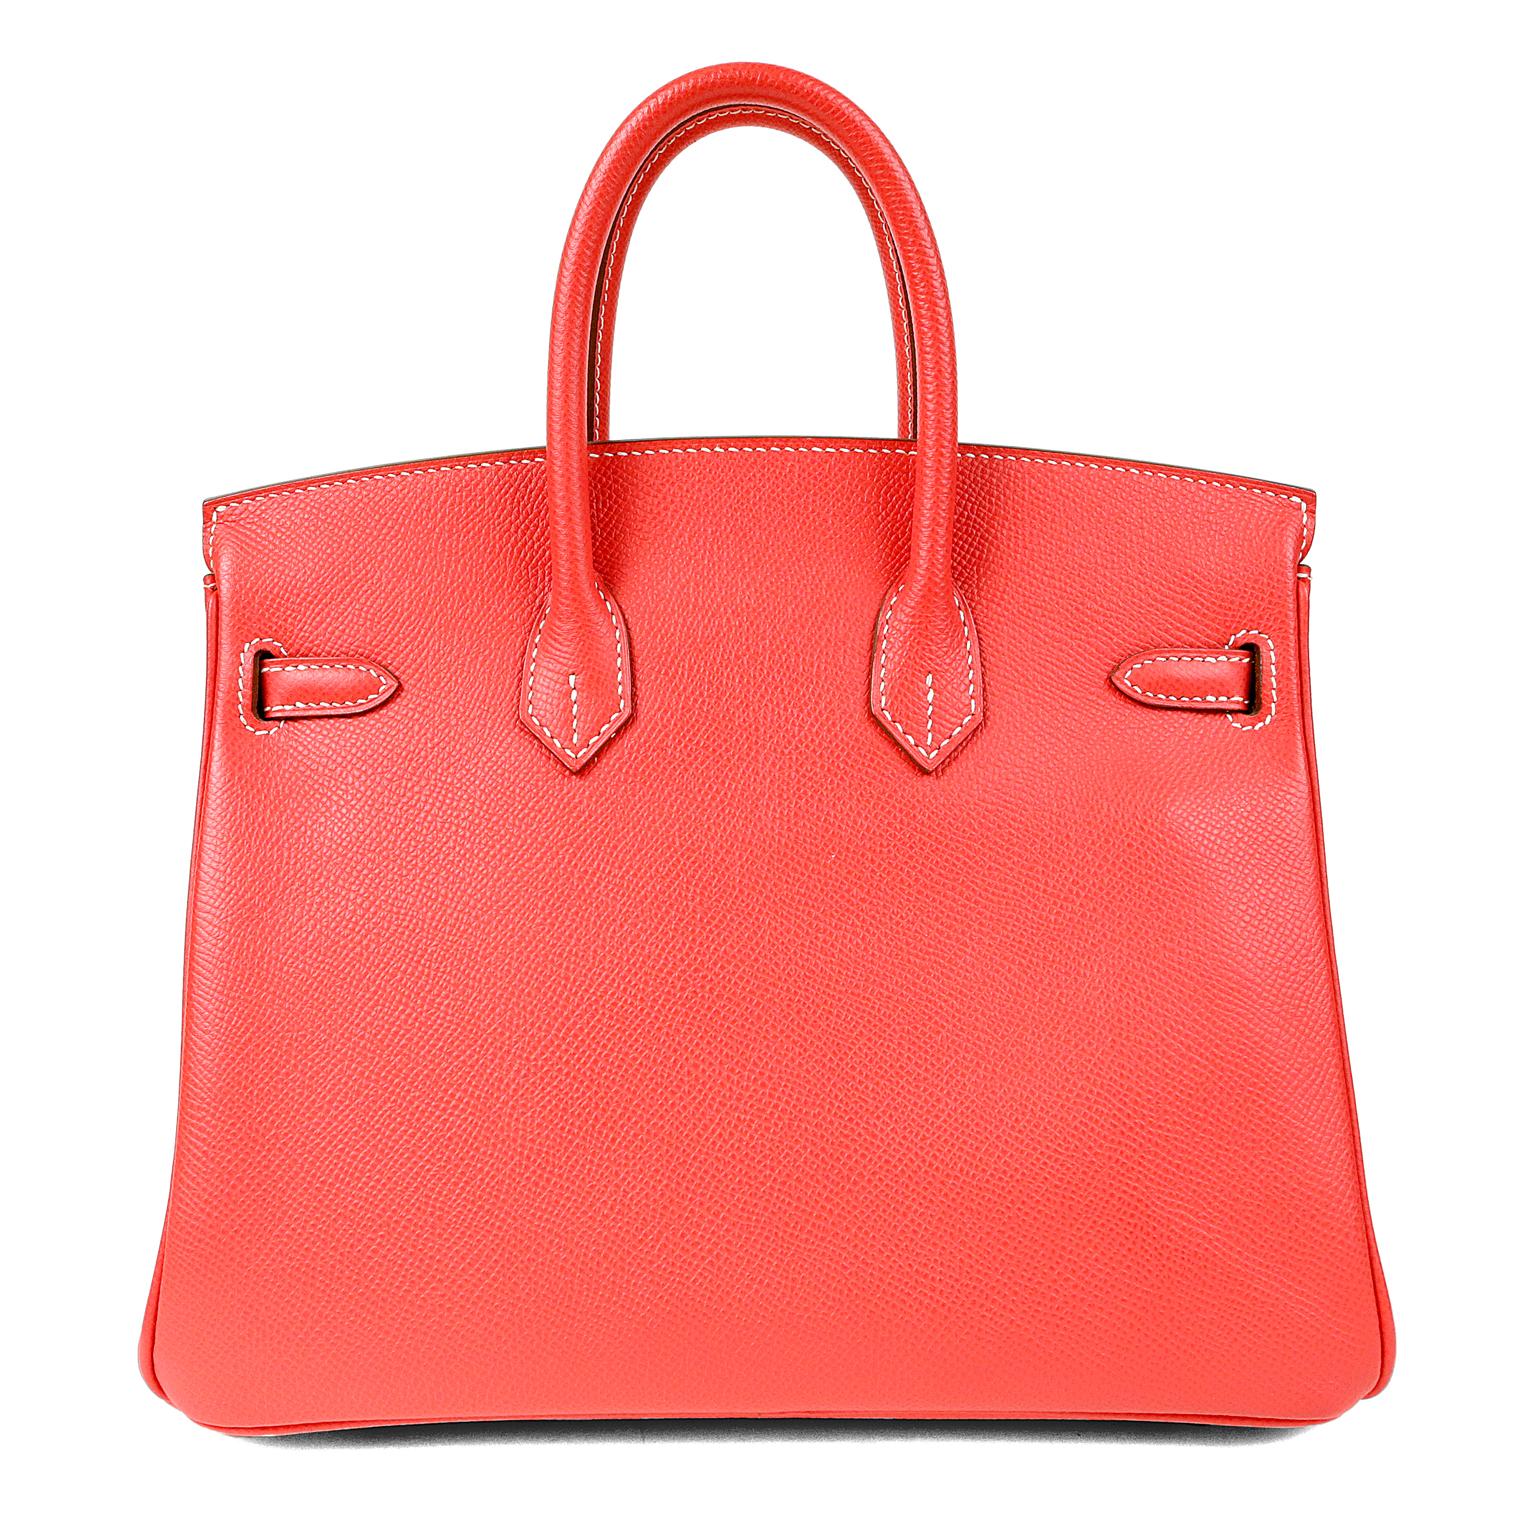 Hermès Rose Jaipur Bi Color Epsom 25 cm Birkin - Pristine Condition; the protective plastic is still intact on the hardware.  
 Considered the ultimate luxury item, the Hermès Birkin is stitched by hand. Waitlists are commonplace.   Rose Jaipur, an